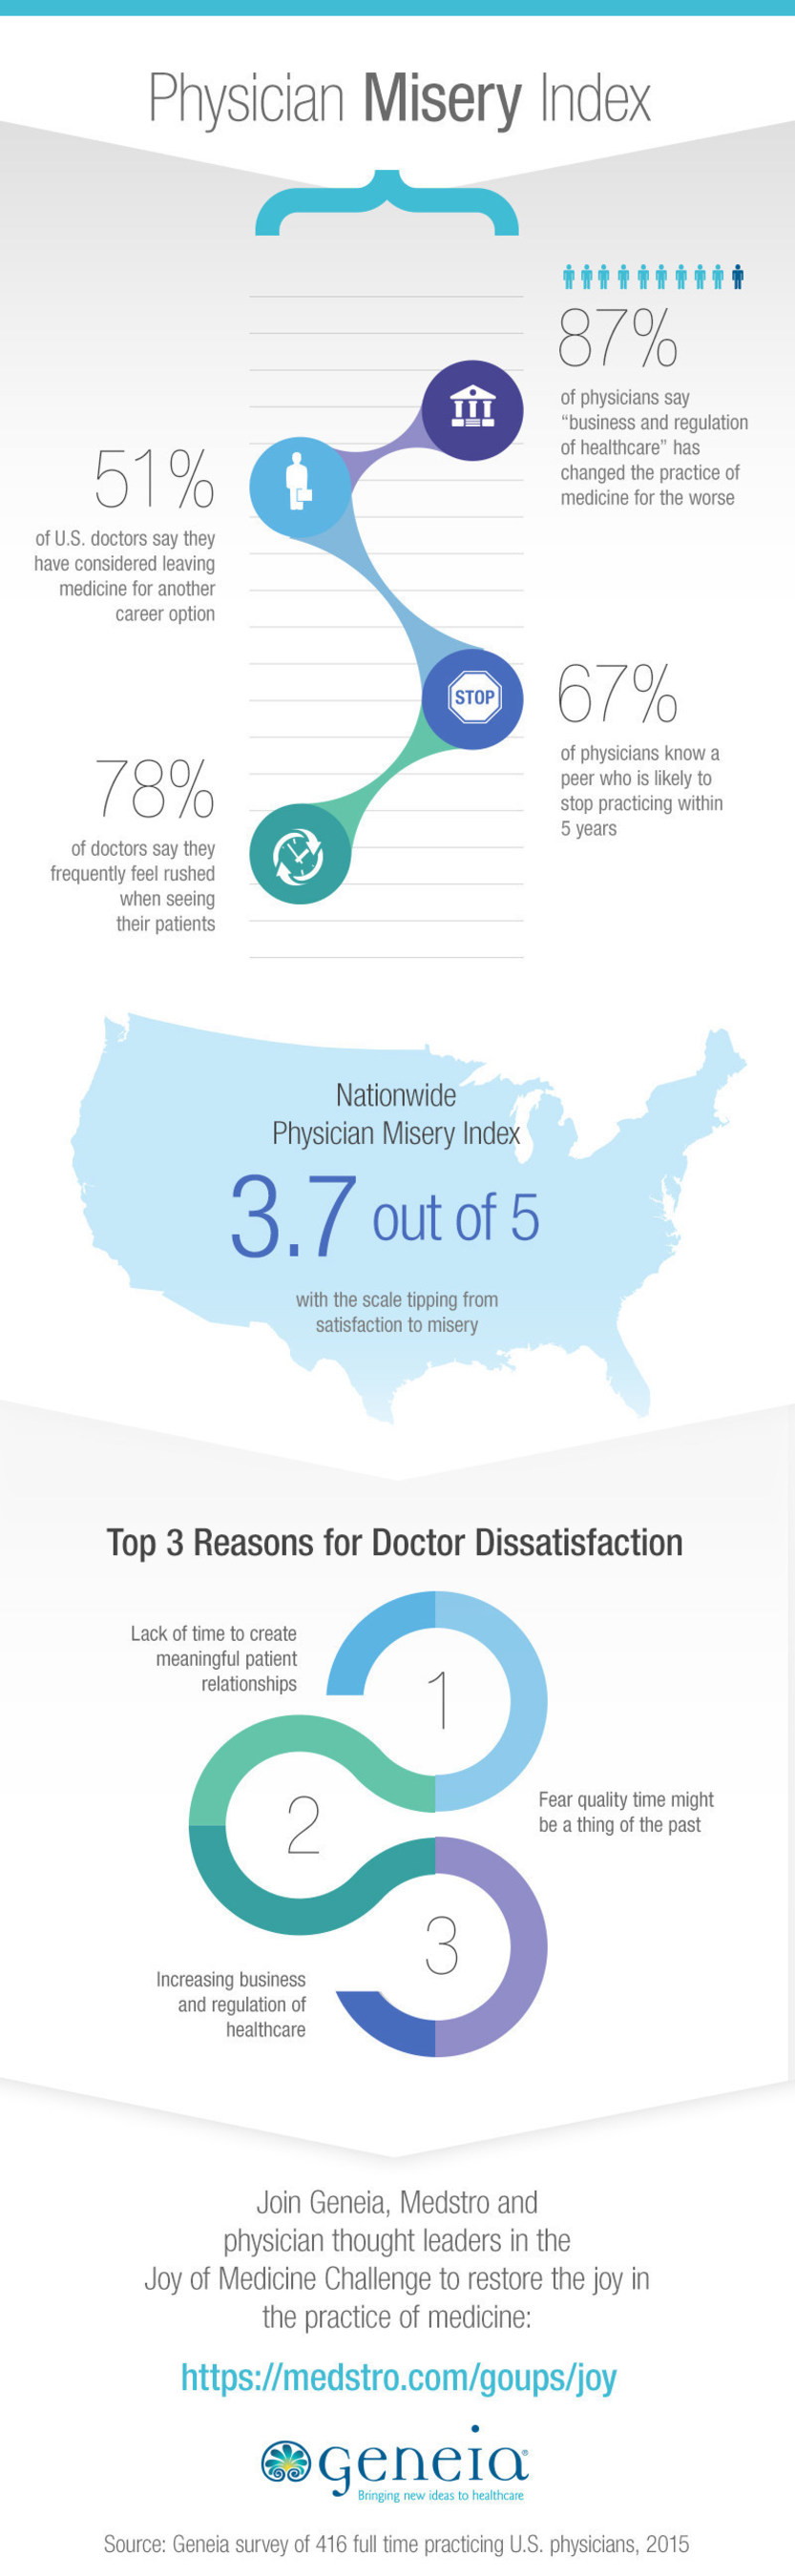 Geneia survey finds that 67% of physicians know a peer who's thinking of leaving medicine. Nationwide Physician Misery Index is 3.7 out of 5.